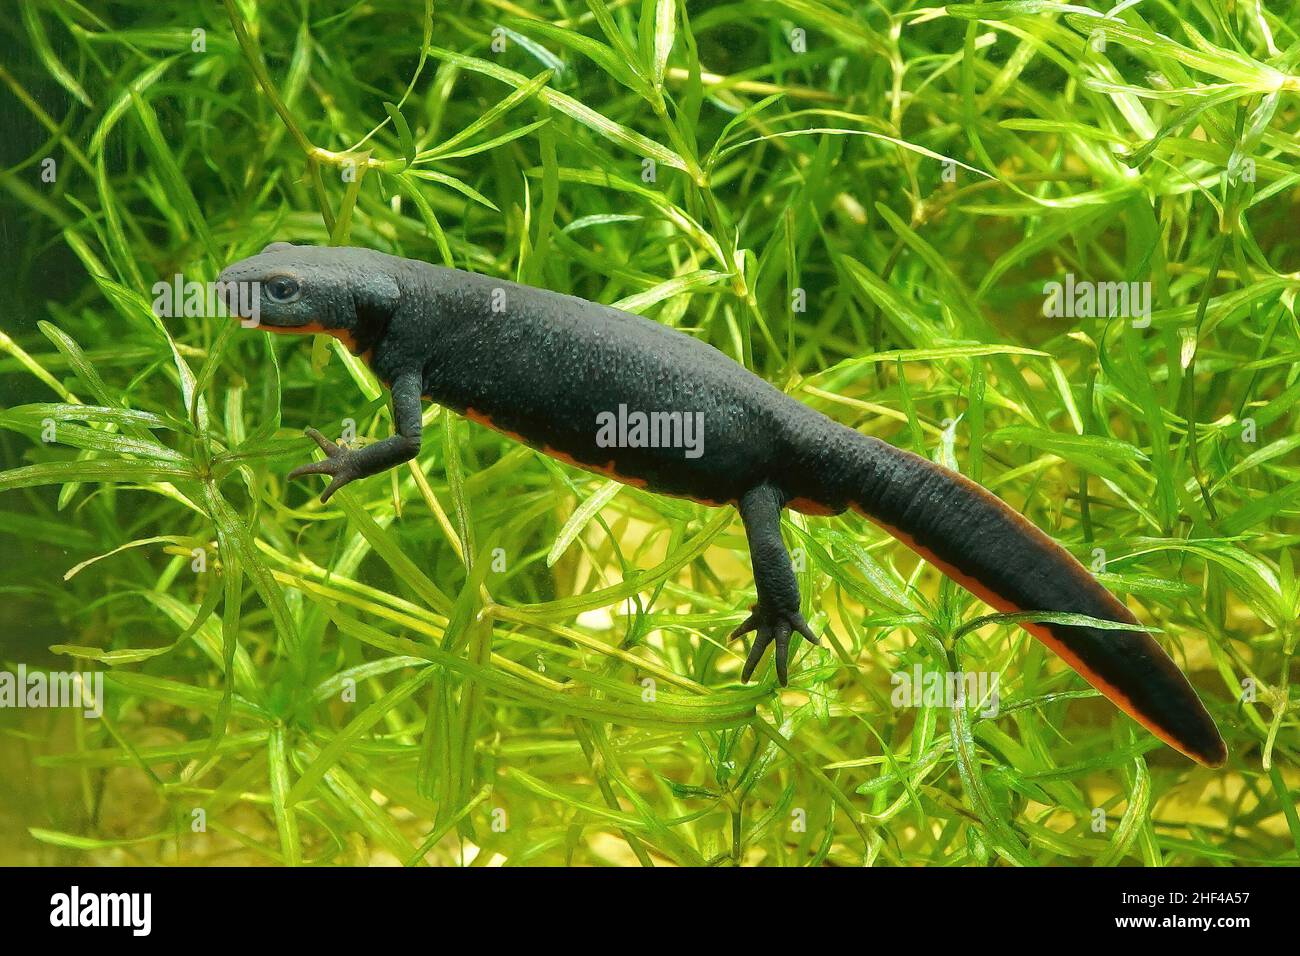 Closeup on an aquatic adult female Chinese fire-bellied newt, Cynops orientalis , underwater Stock Photo